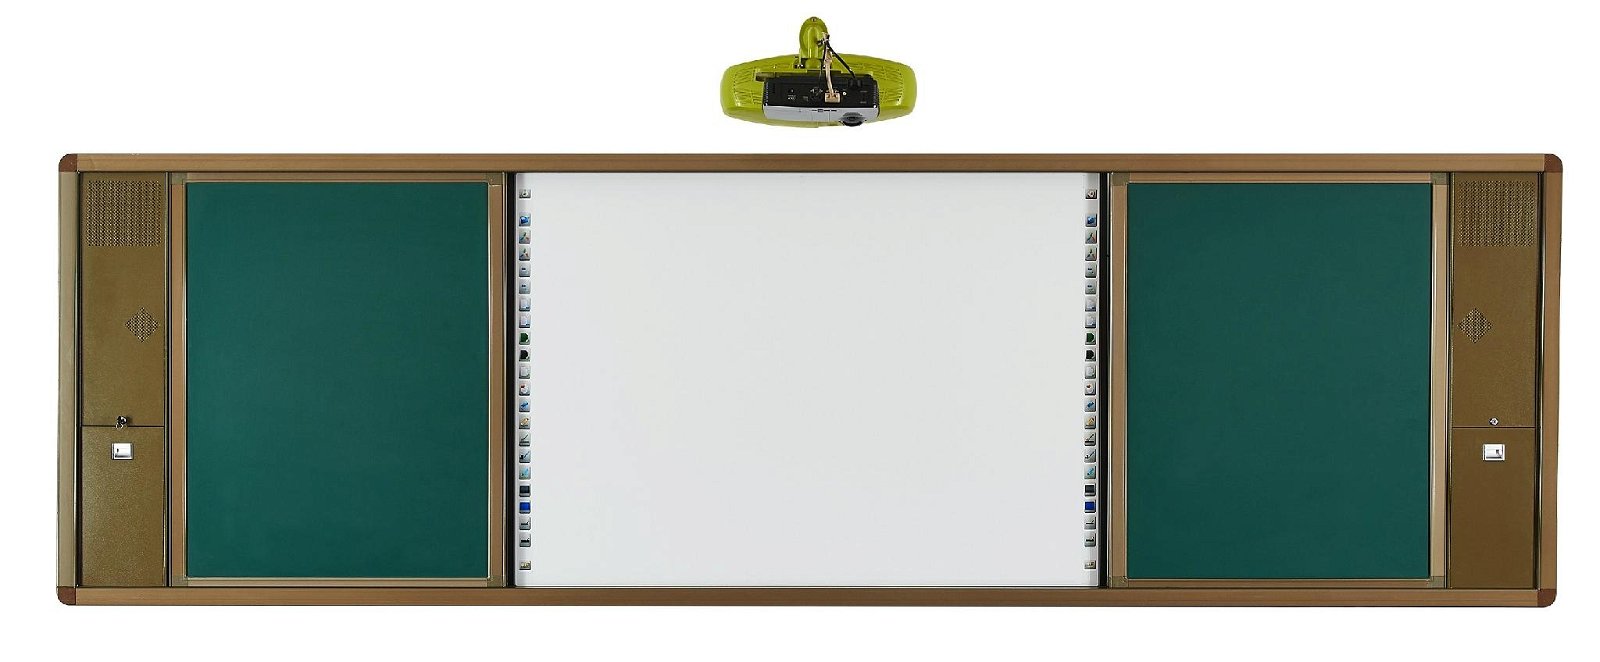 Bilateral Series 85inch Interactive whiteboard learning system